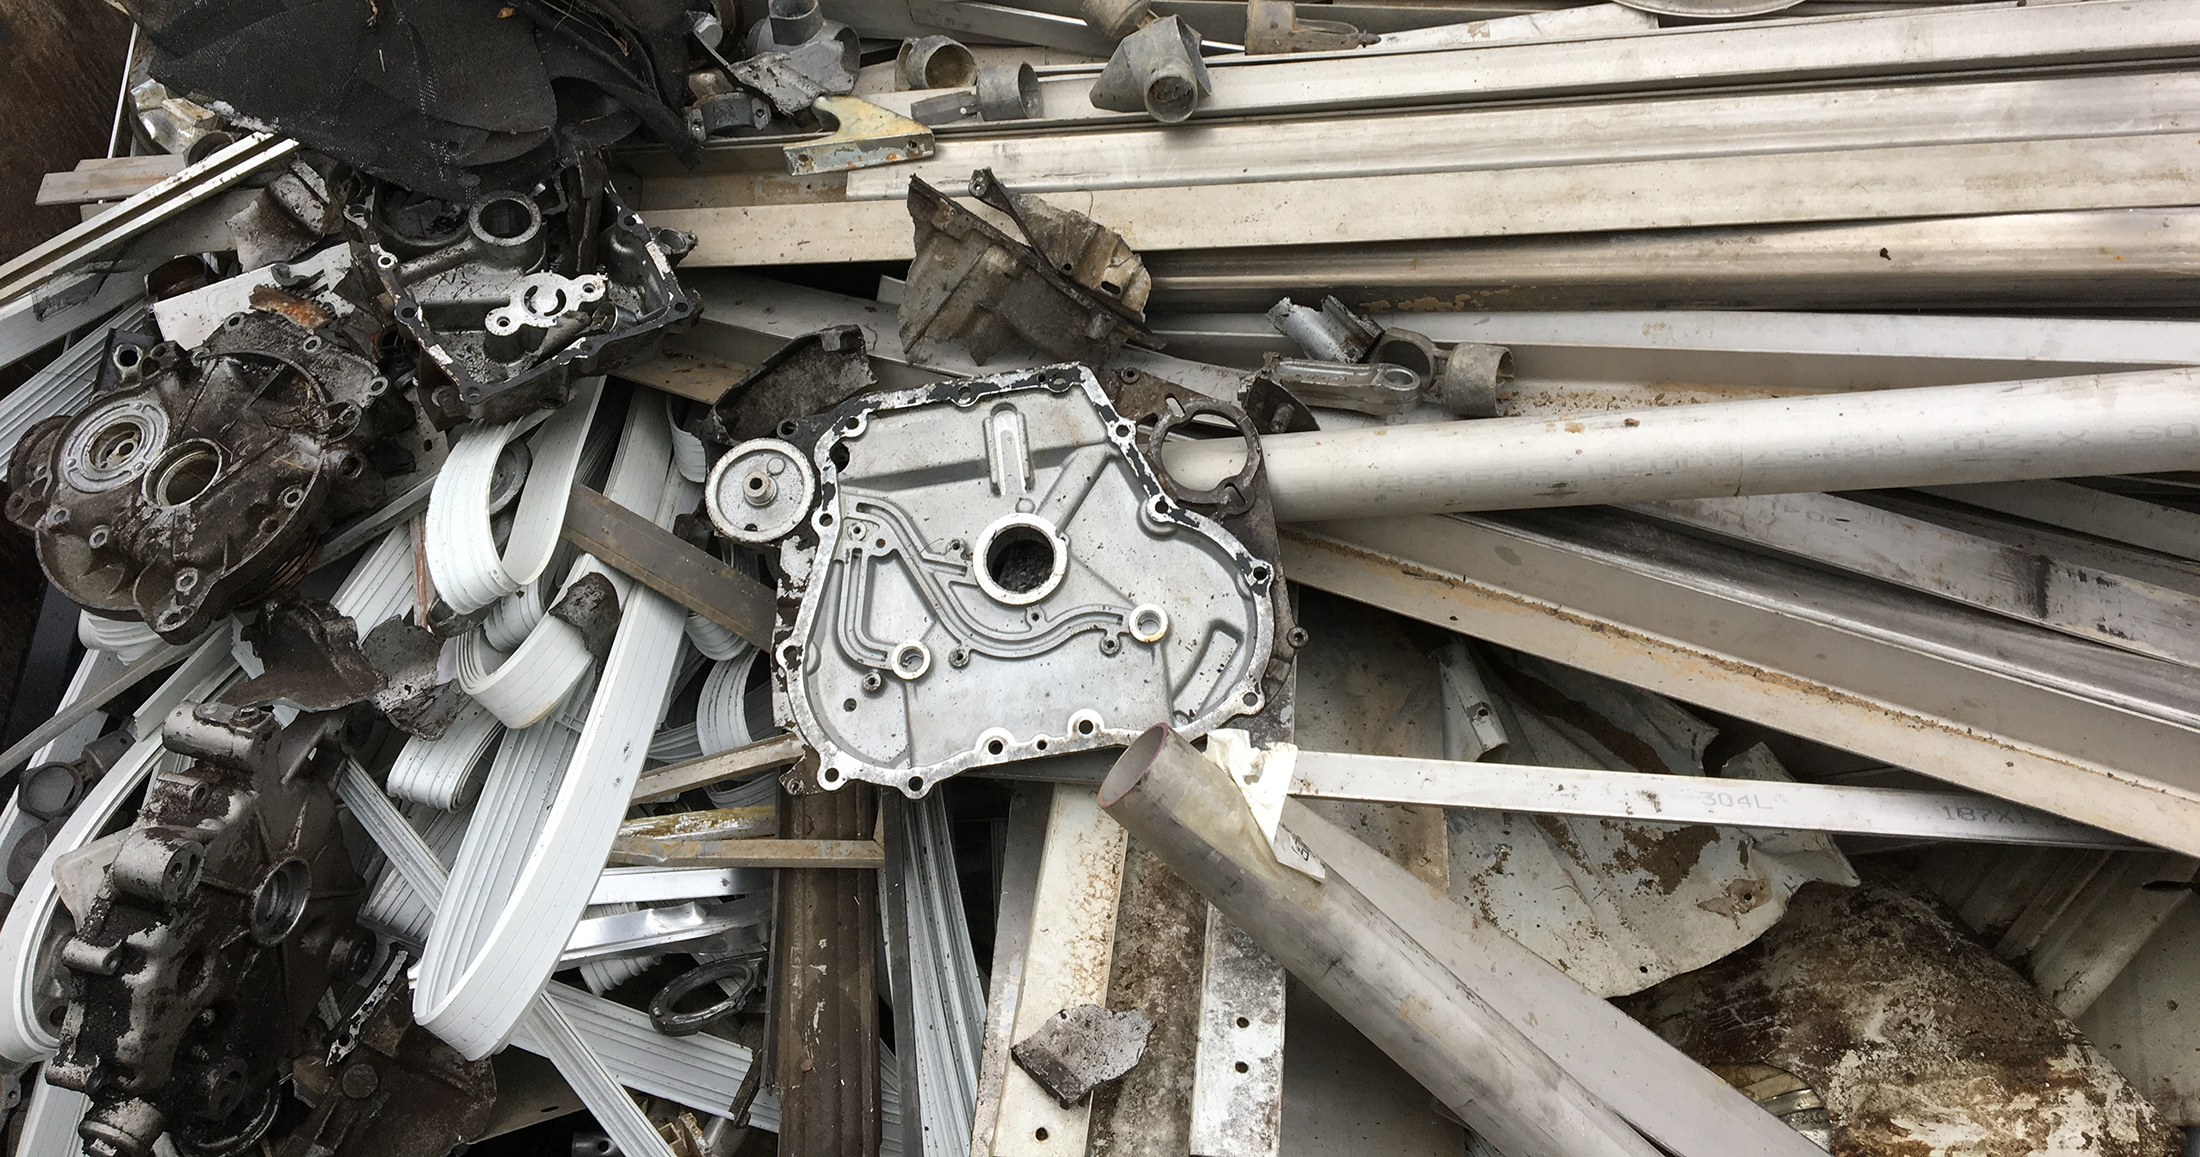 Download Our Free Guide On How To Sell Scrap Metal